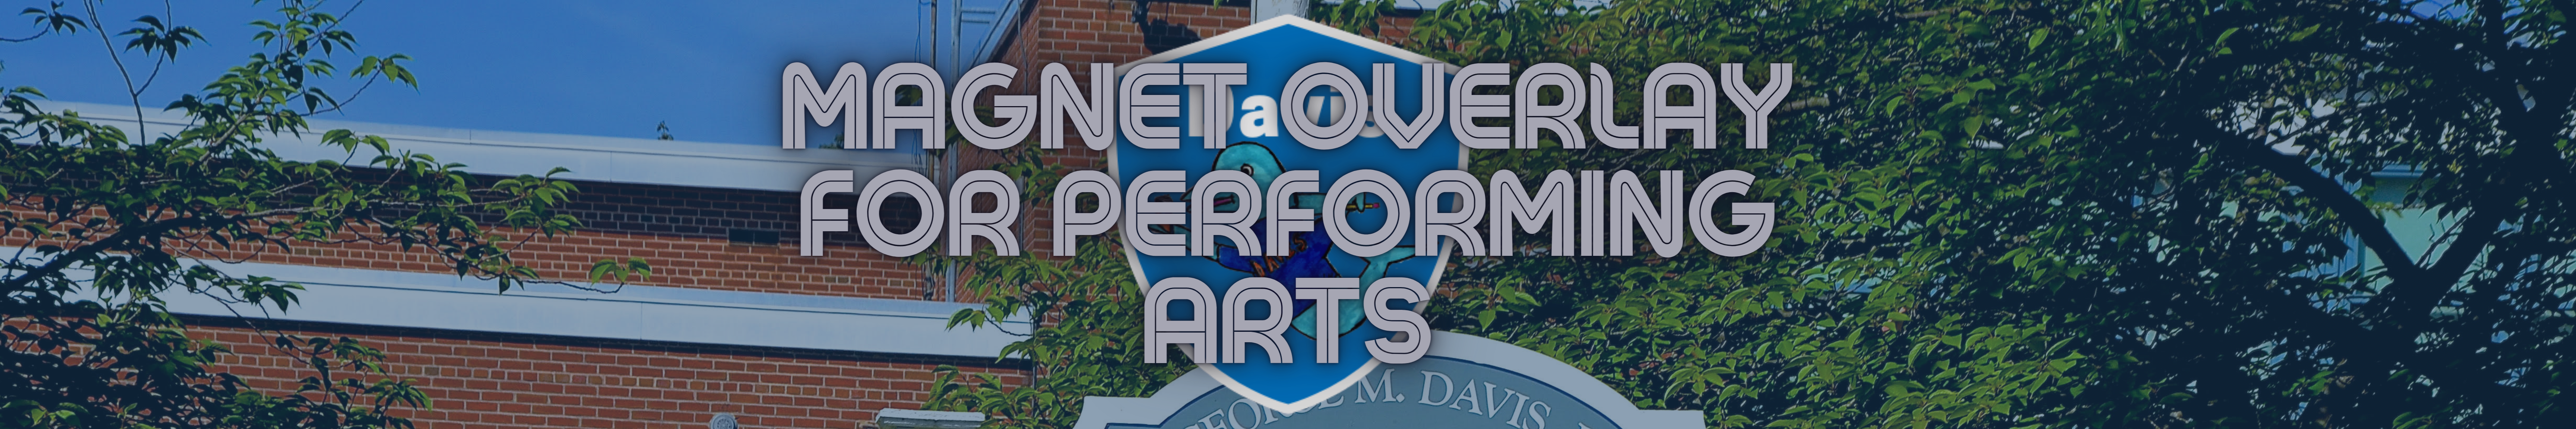 Magnet Overlay for Performing Arts banner